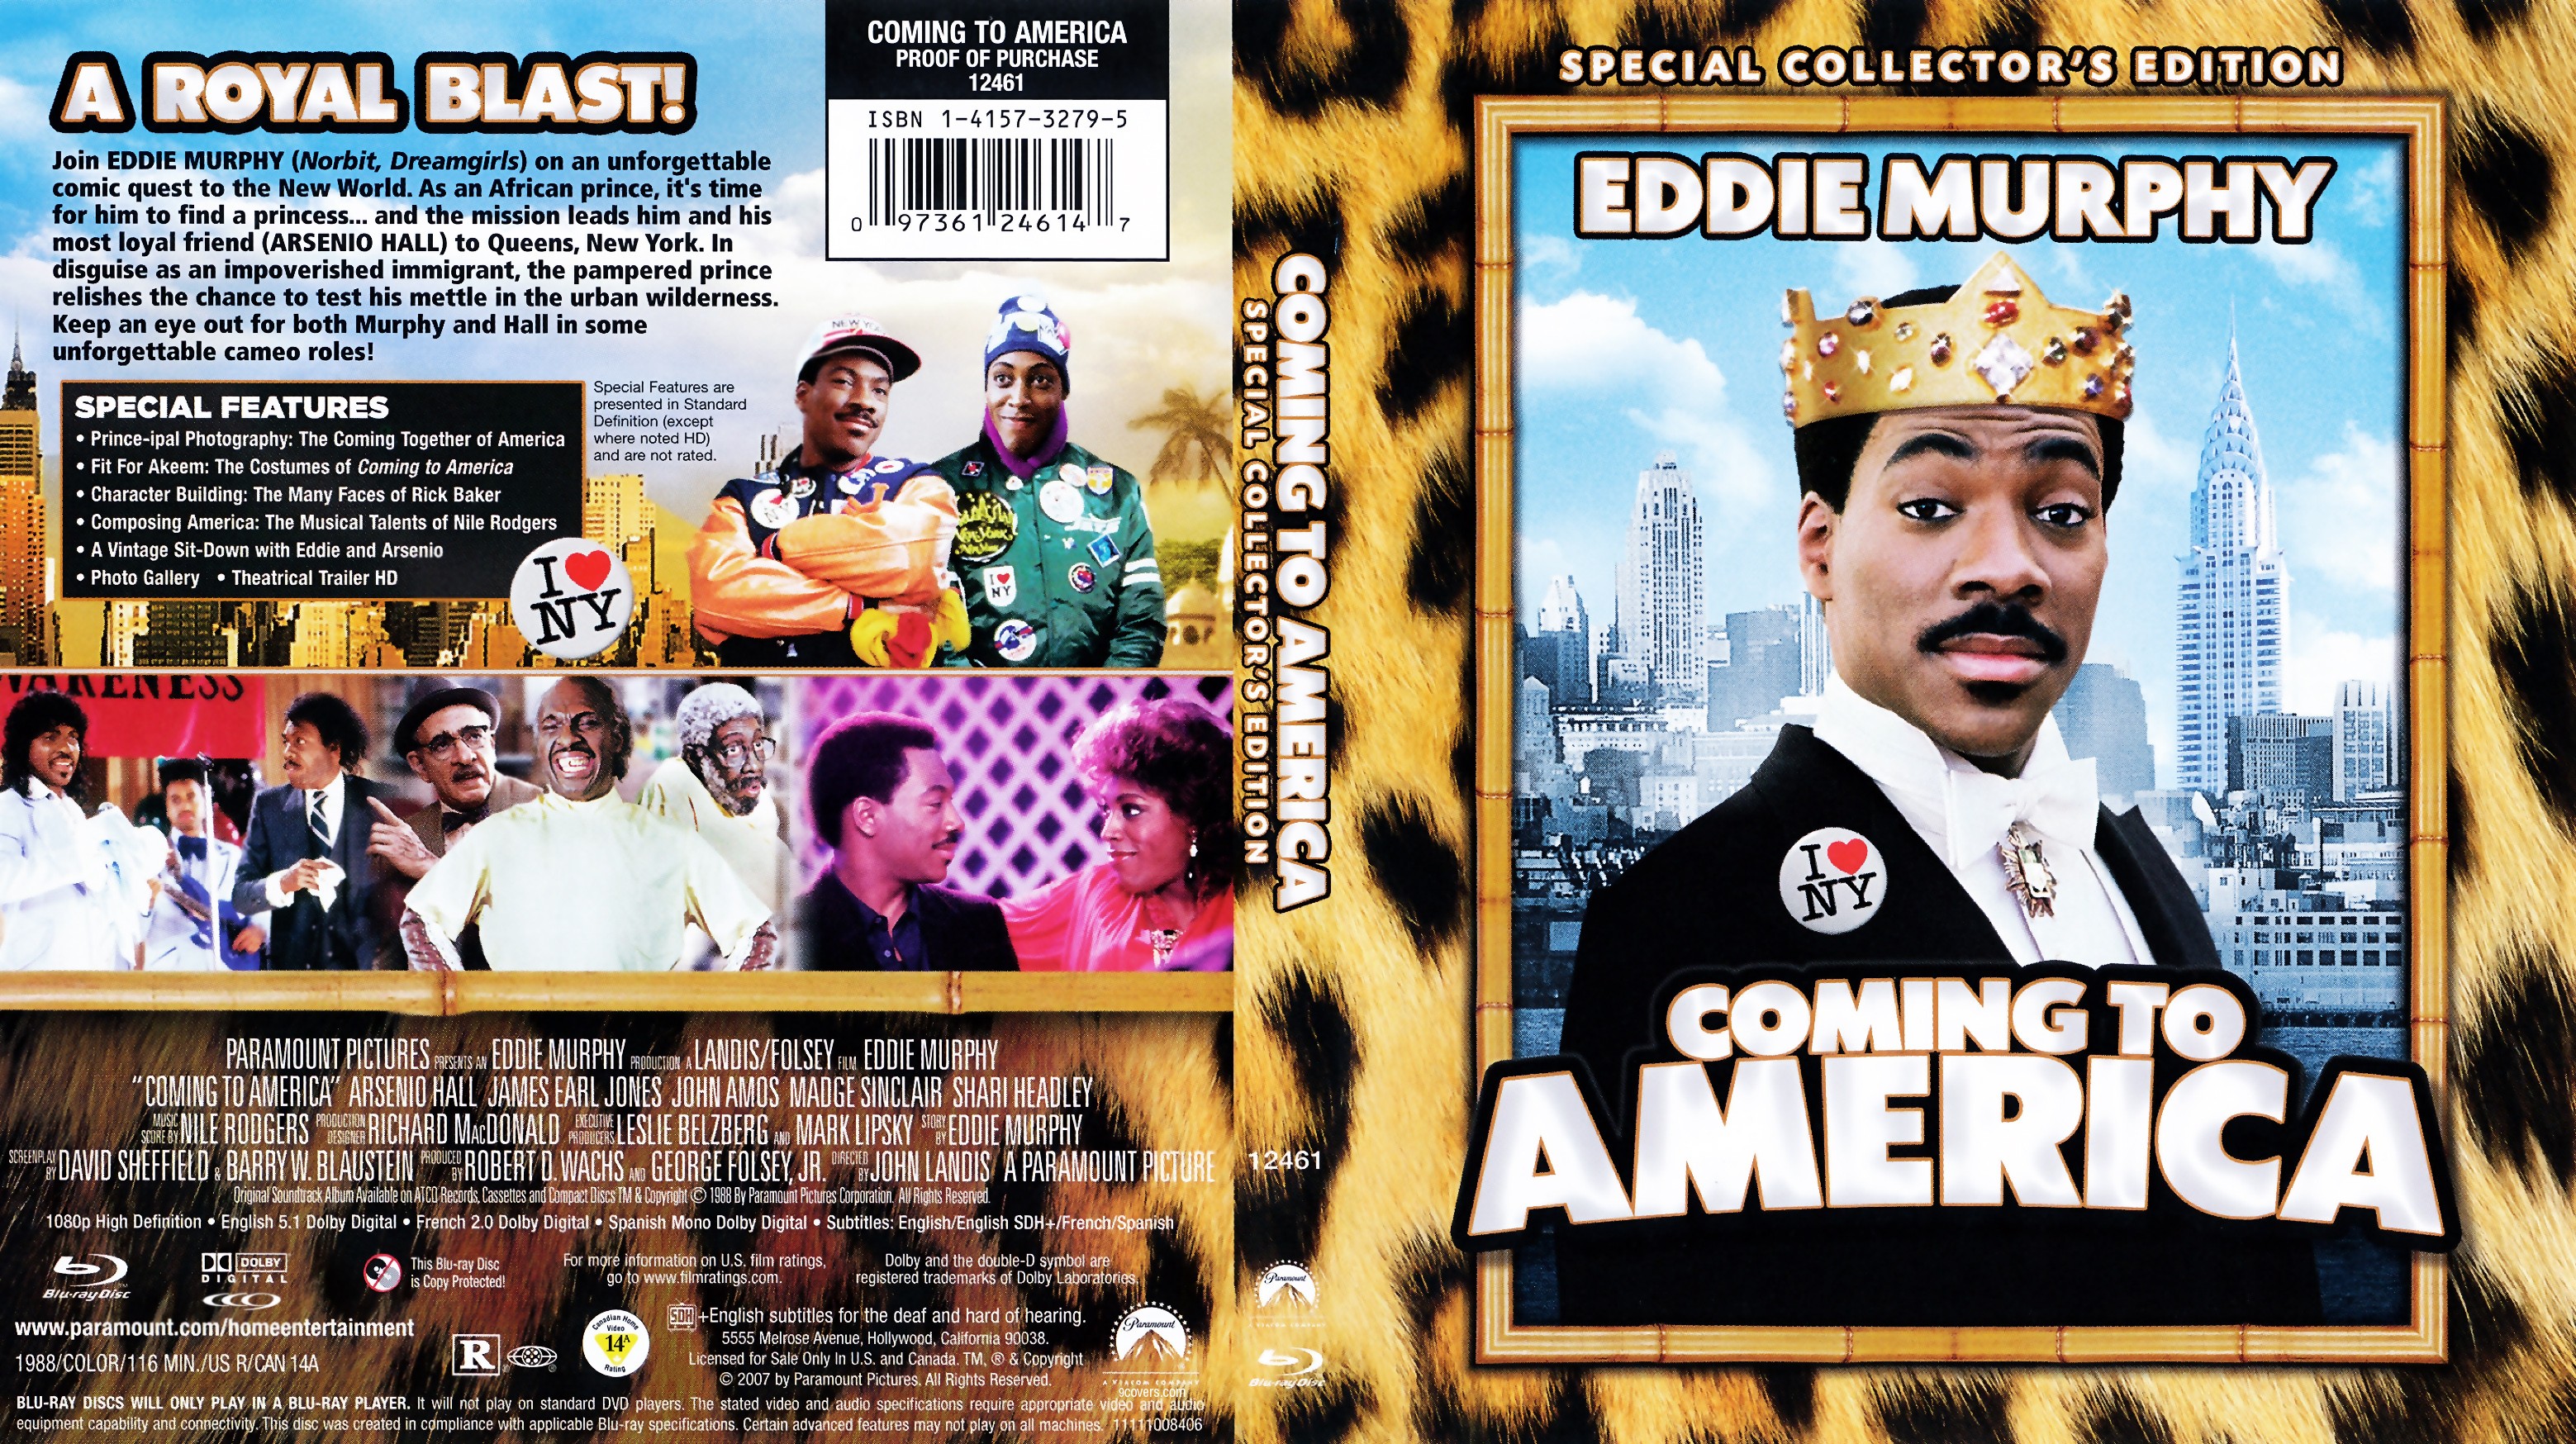 Jaquette DVD Un prince a New York - Coming to america (Canadienne) (BLU-RAY)